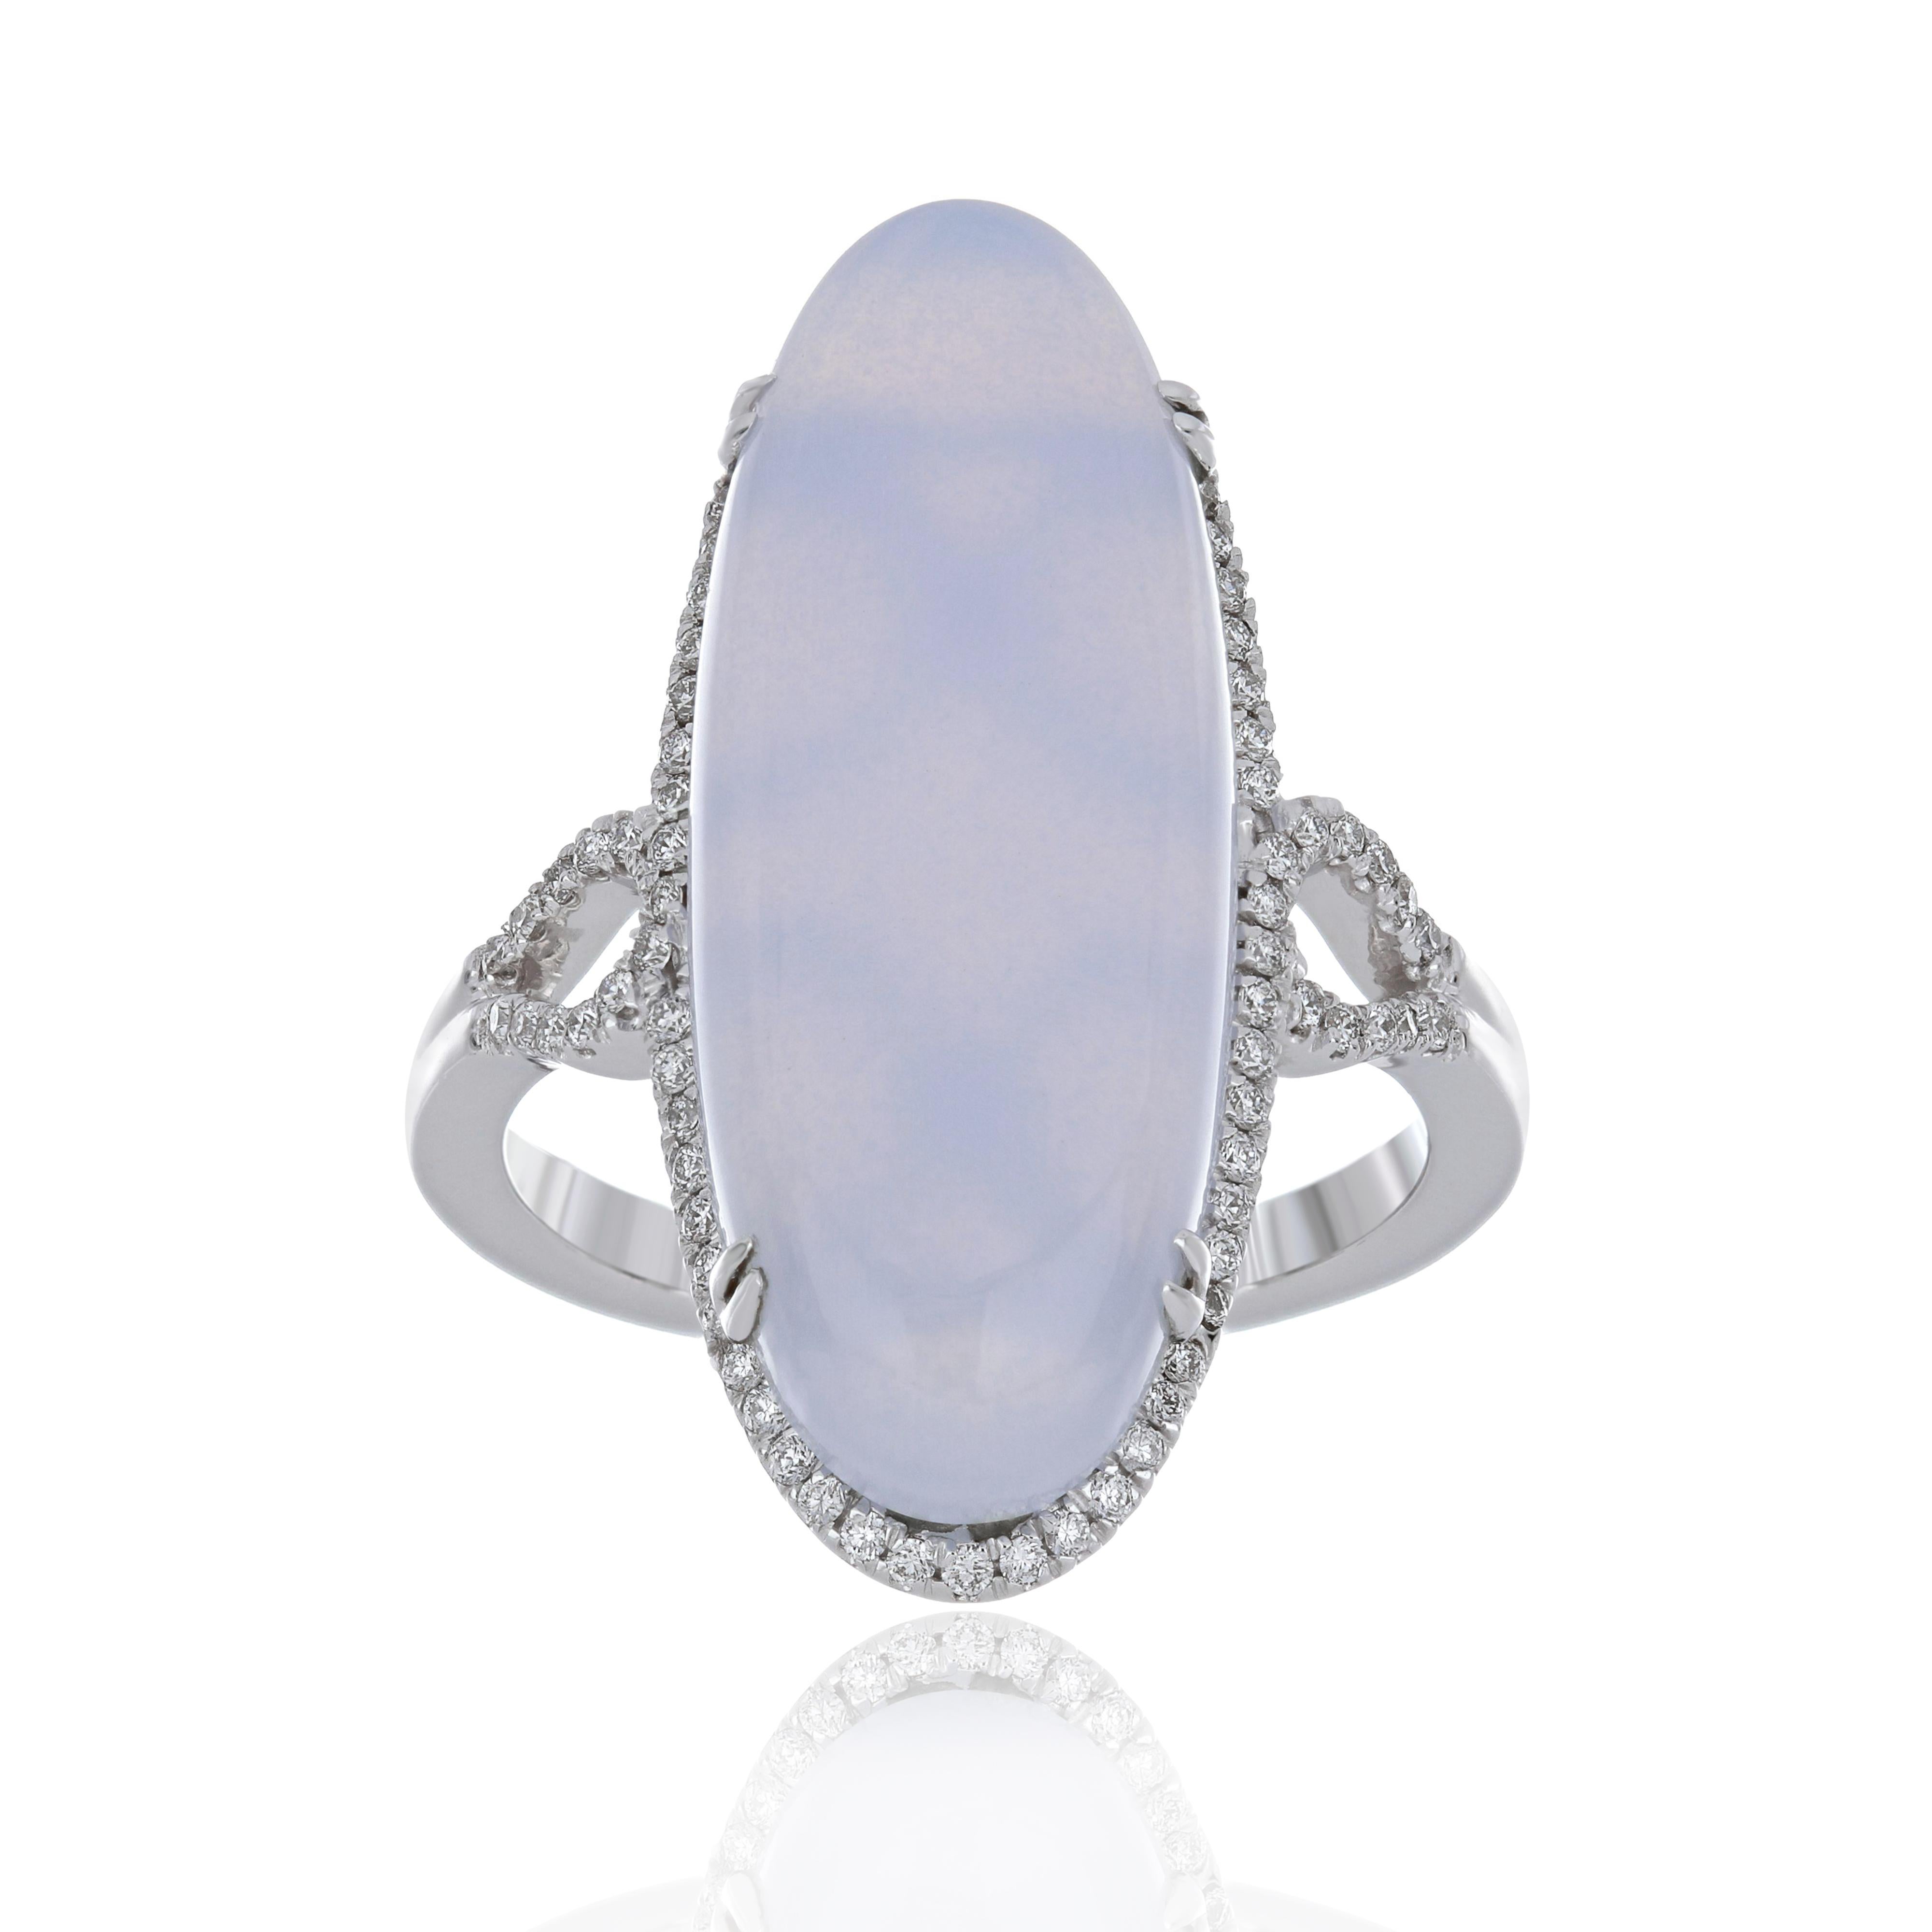 For Sale:  Blue Chalcedony and Diamond Studded Ring 14 Karat White Gold 2